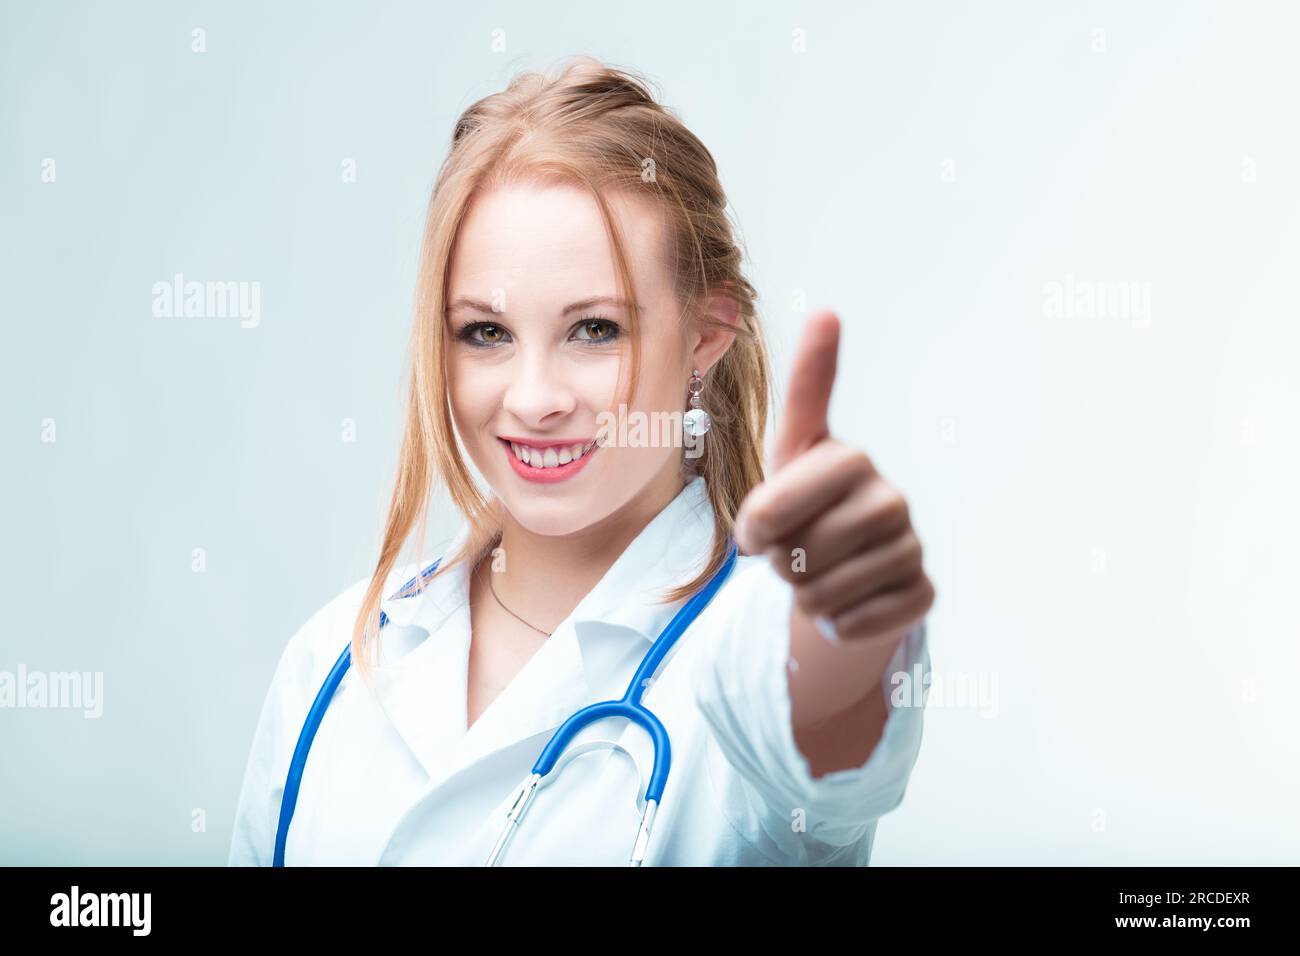 Medicine's good! Treatments are fine! Insurances sorted! Young, cheerful doctor giving thumbs-up assures all will be well Stock Photo